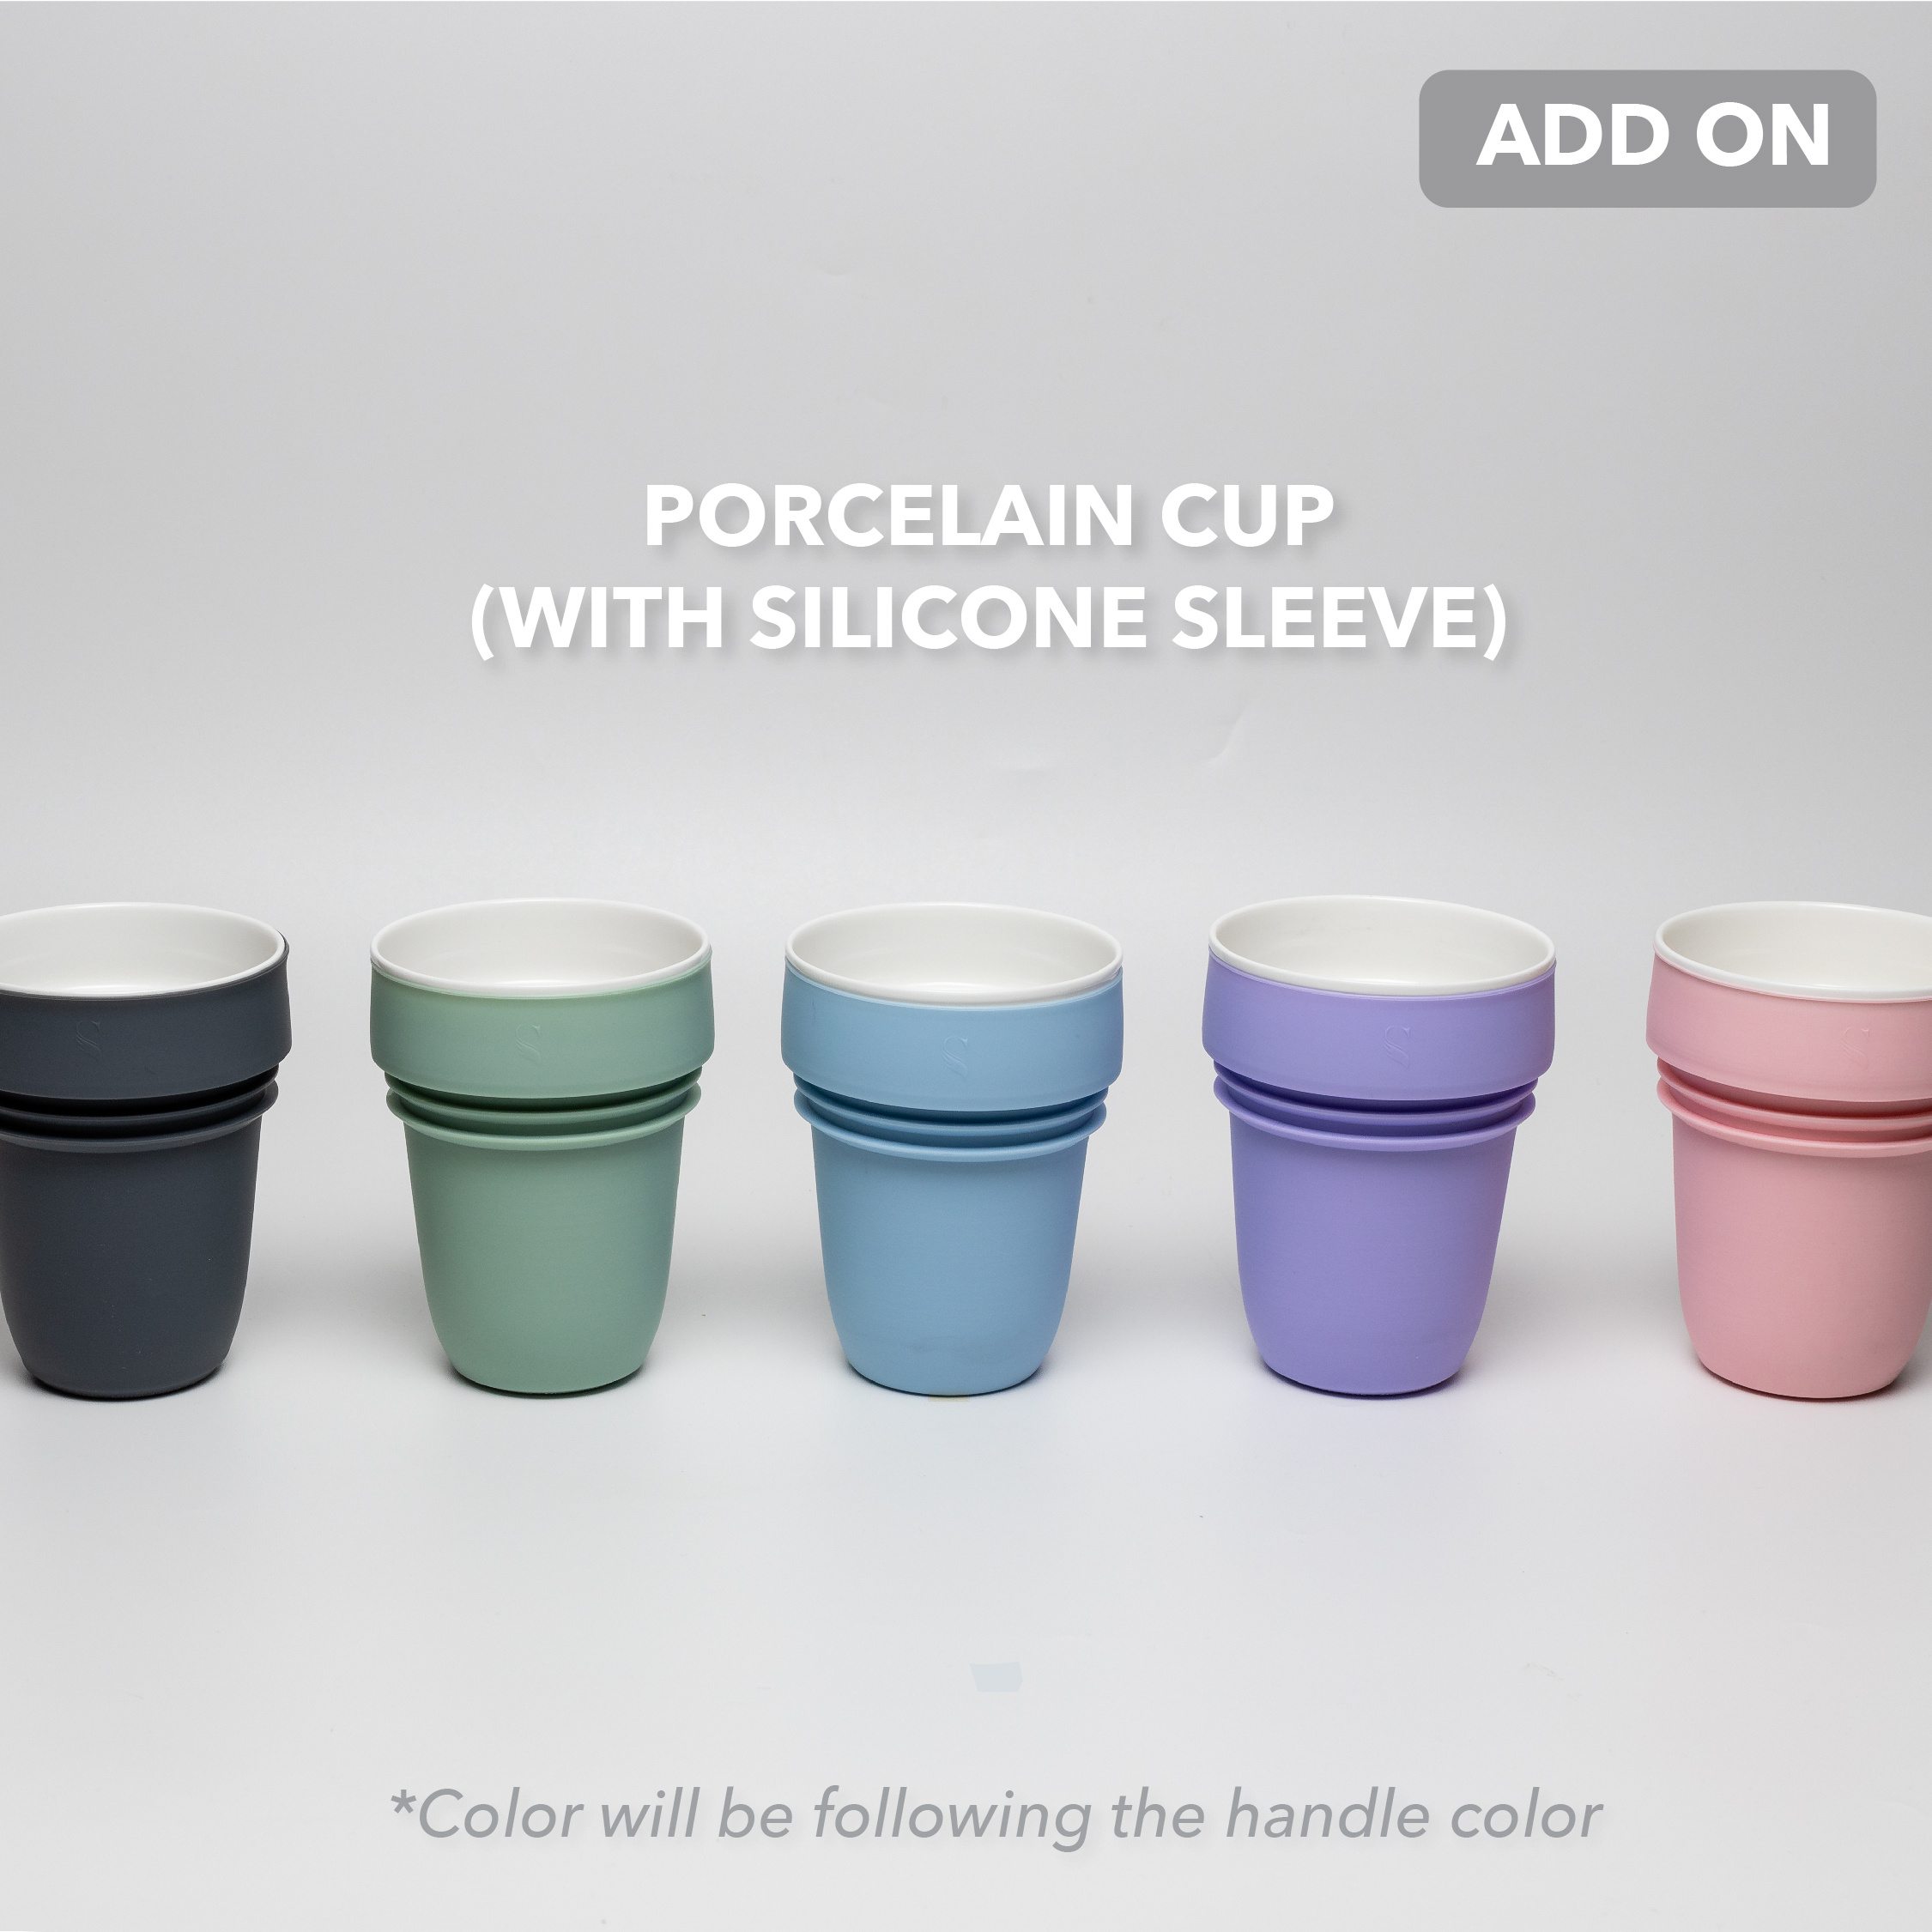 Add-on 450ml Porcelain Cup (S) with Silicone